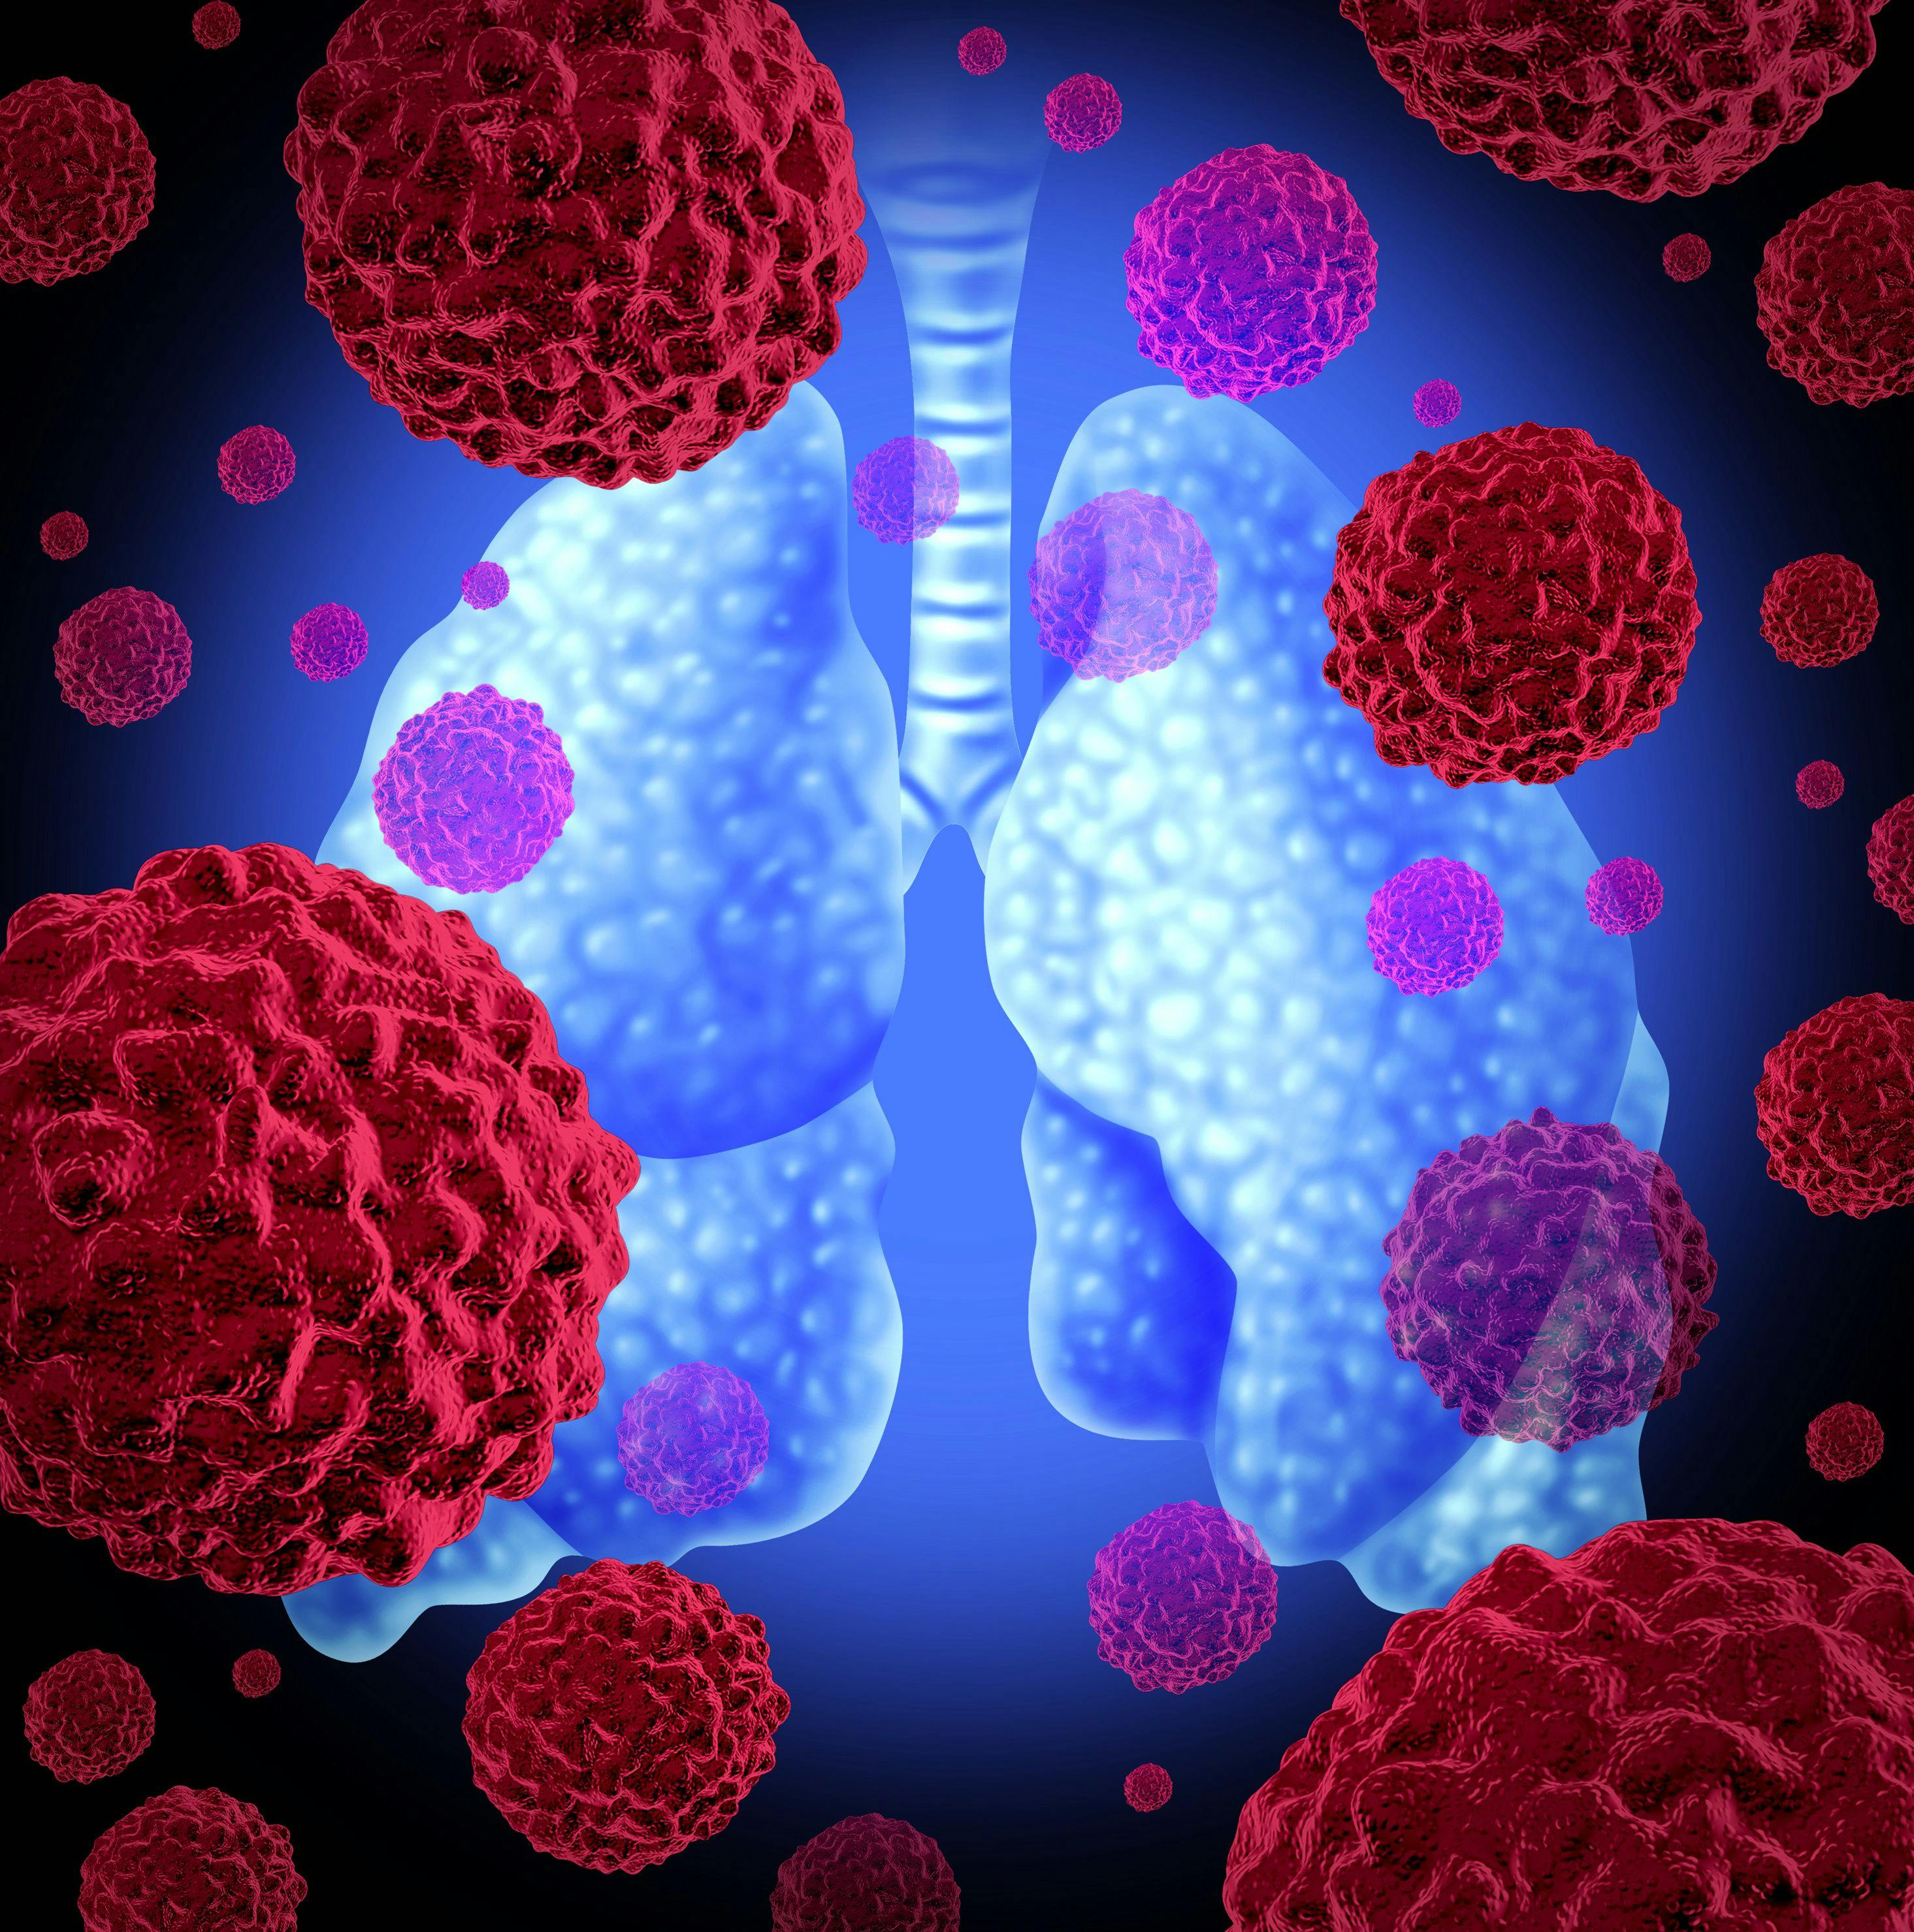 Black patients with non–small cell lung cancer were more likely to be diagnosed at advanced stages of disease, less likely to receive surgery in early stages, and had increased cancer mortality rates than White patients.